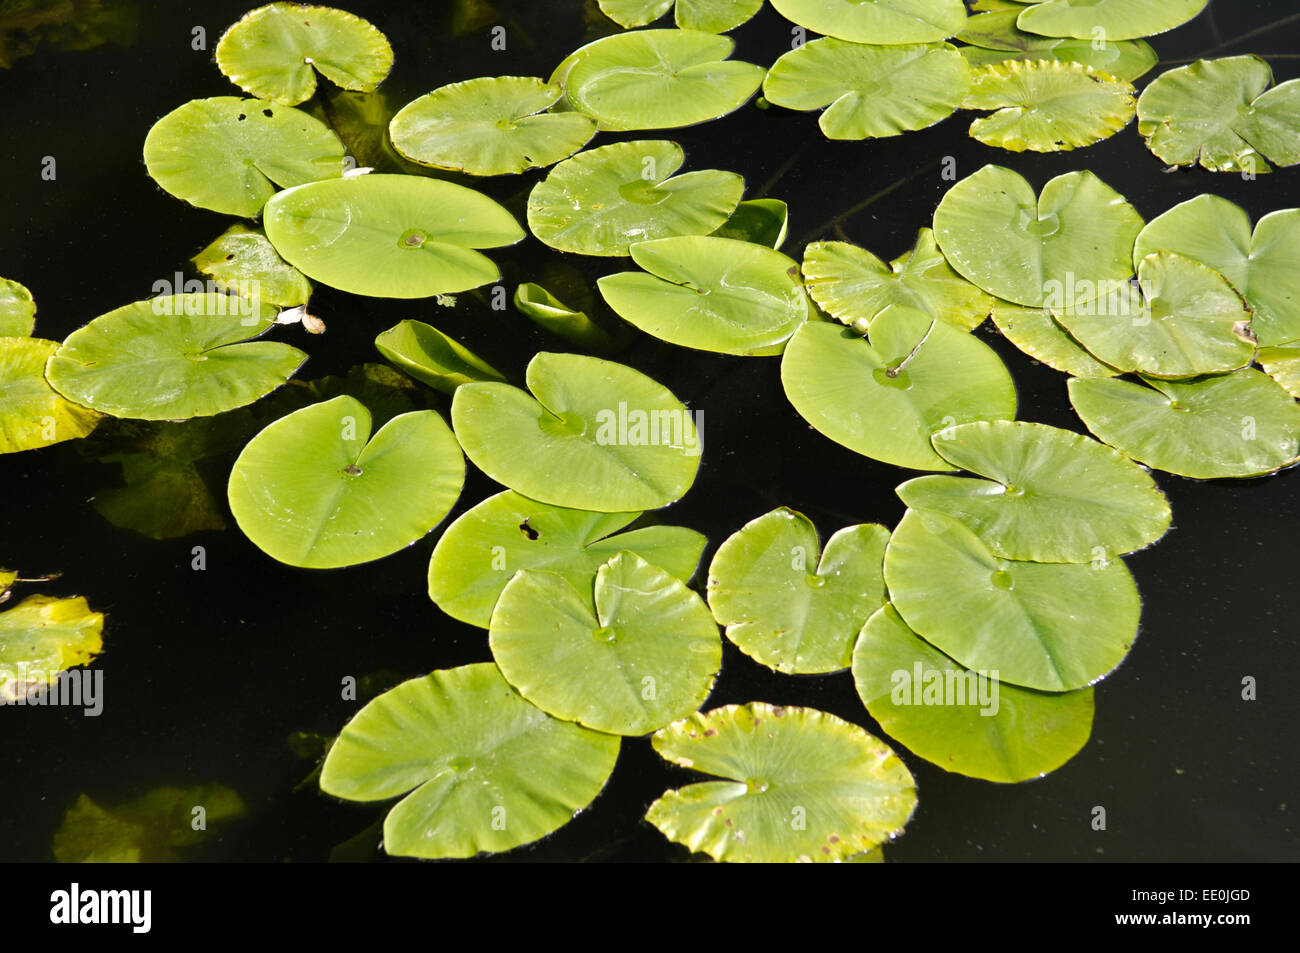 Water lily pads Stock Photo